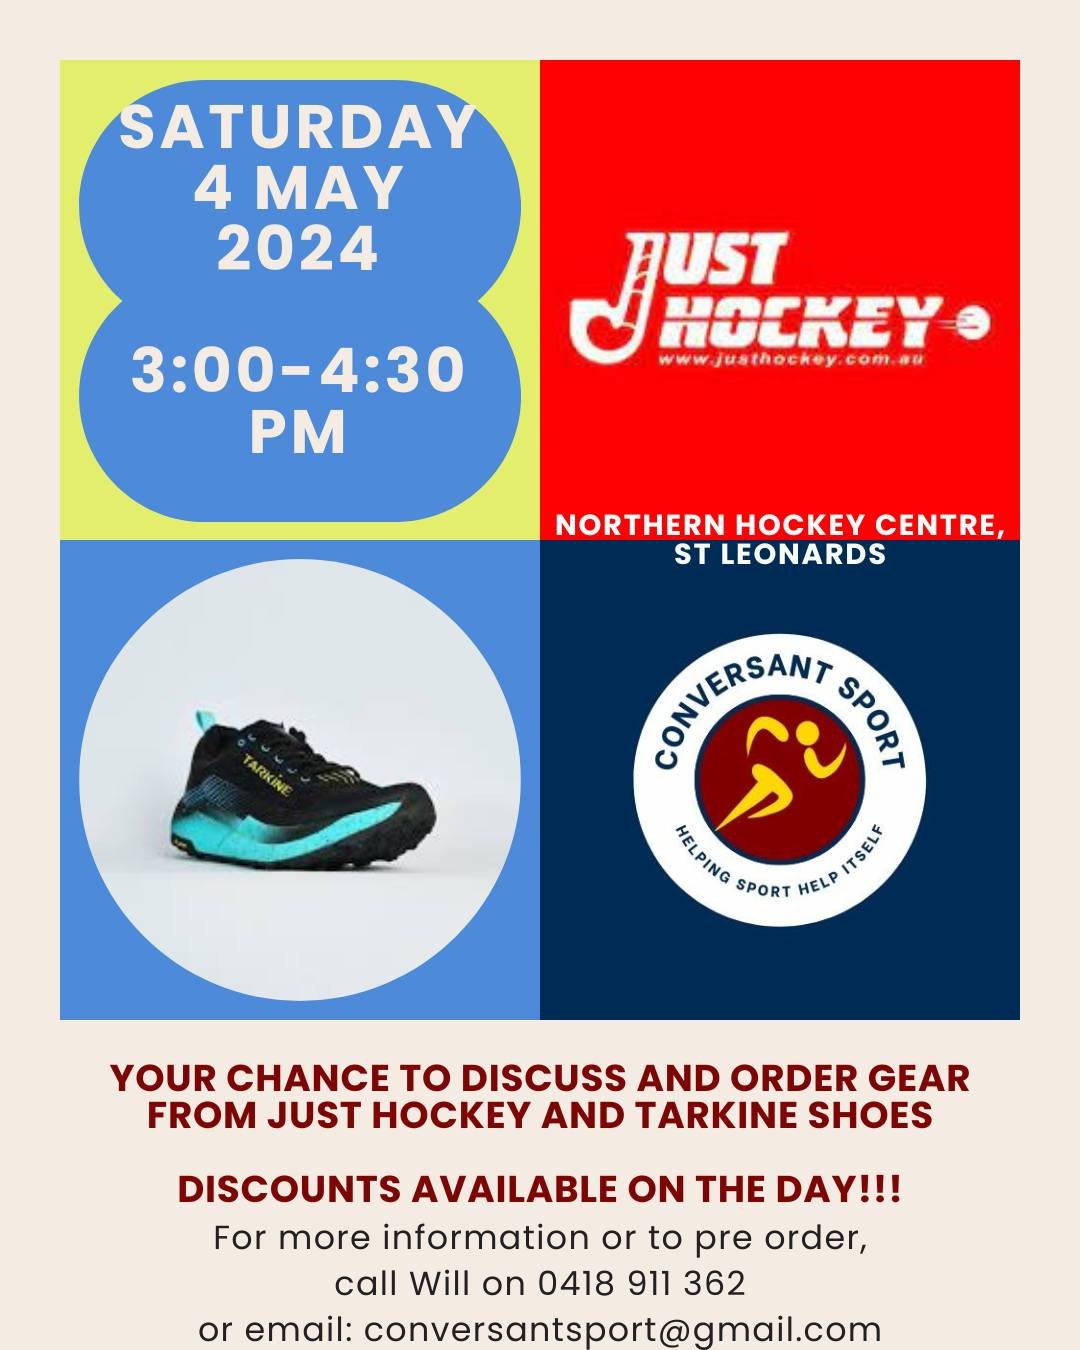 OOPS!!! Check the date!!

We're coming to Launceston on SATURDAY!!

Saturday 4 May we will be set up in the bar area of the Northern Hockey Centre, St Leonards, ready to do some deals on Just Hockey gear and Tarkine Shoes.

3:00pm-4:30pm, pop up and 